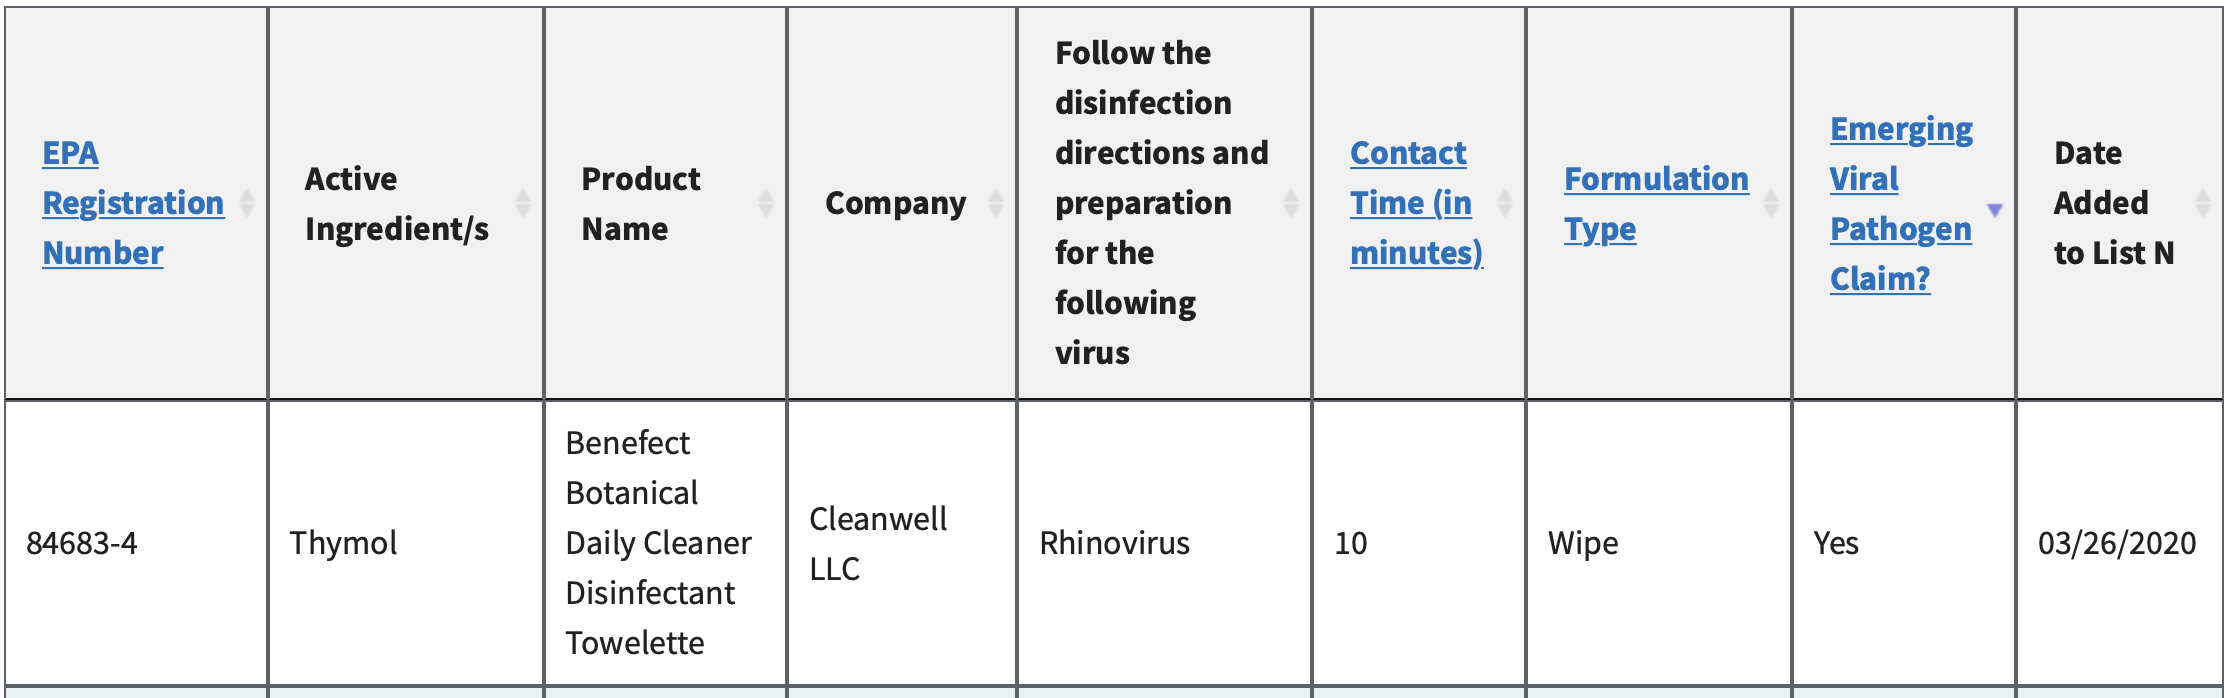 COVID-19 and disinfectants